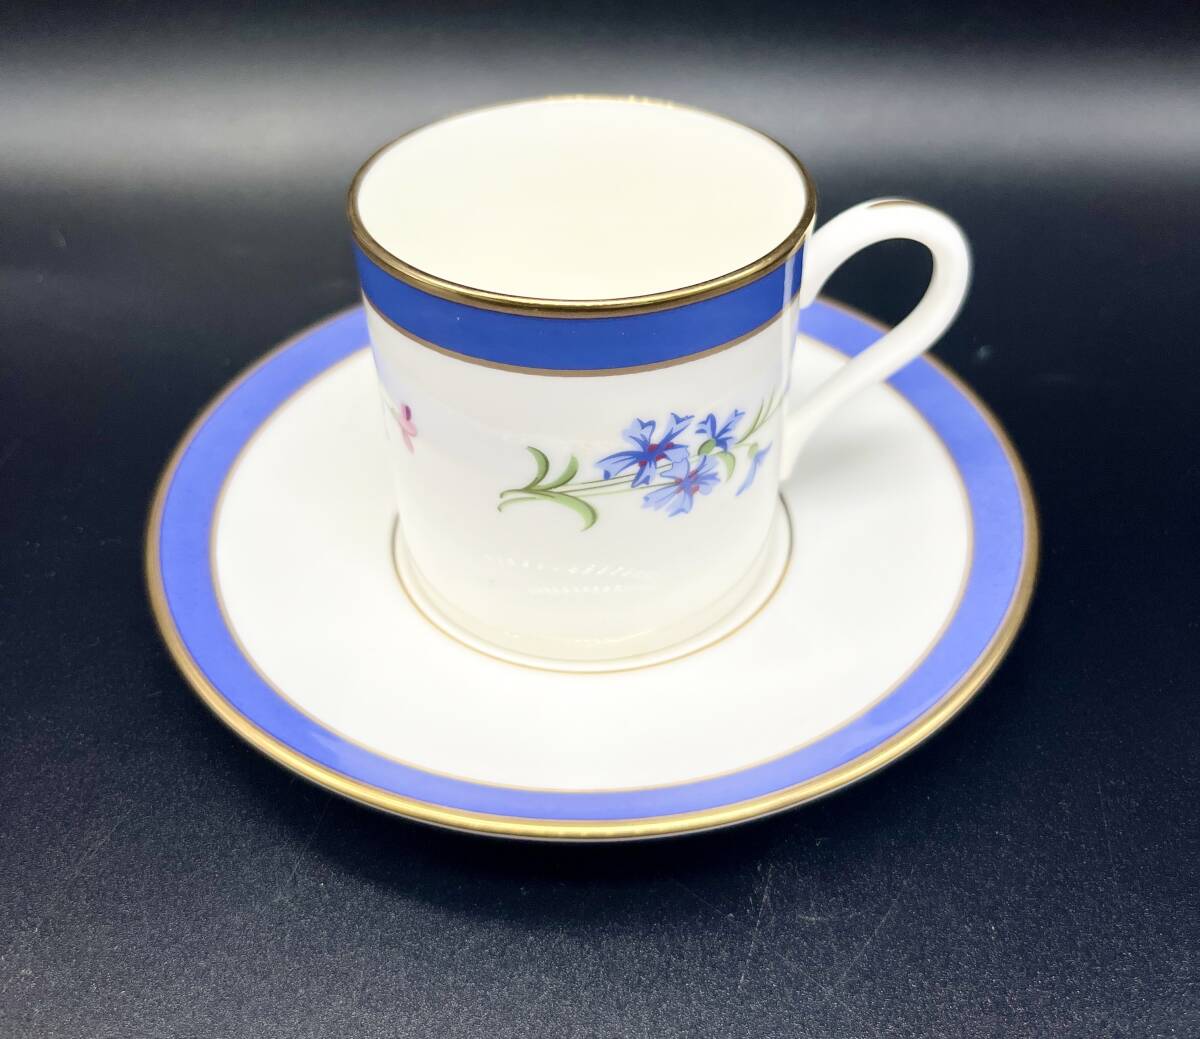 ..(PTY43) Tiffany TIFFANY&Co. floral small cup 2 customer set box attaching secondhand goods 80 size 